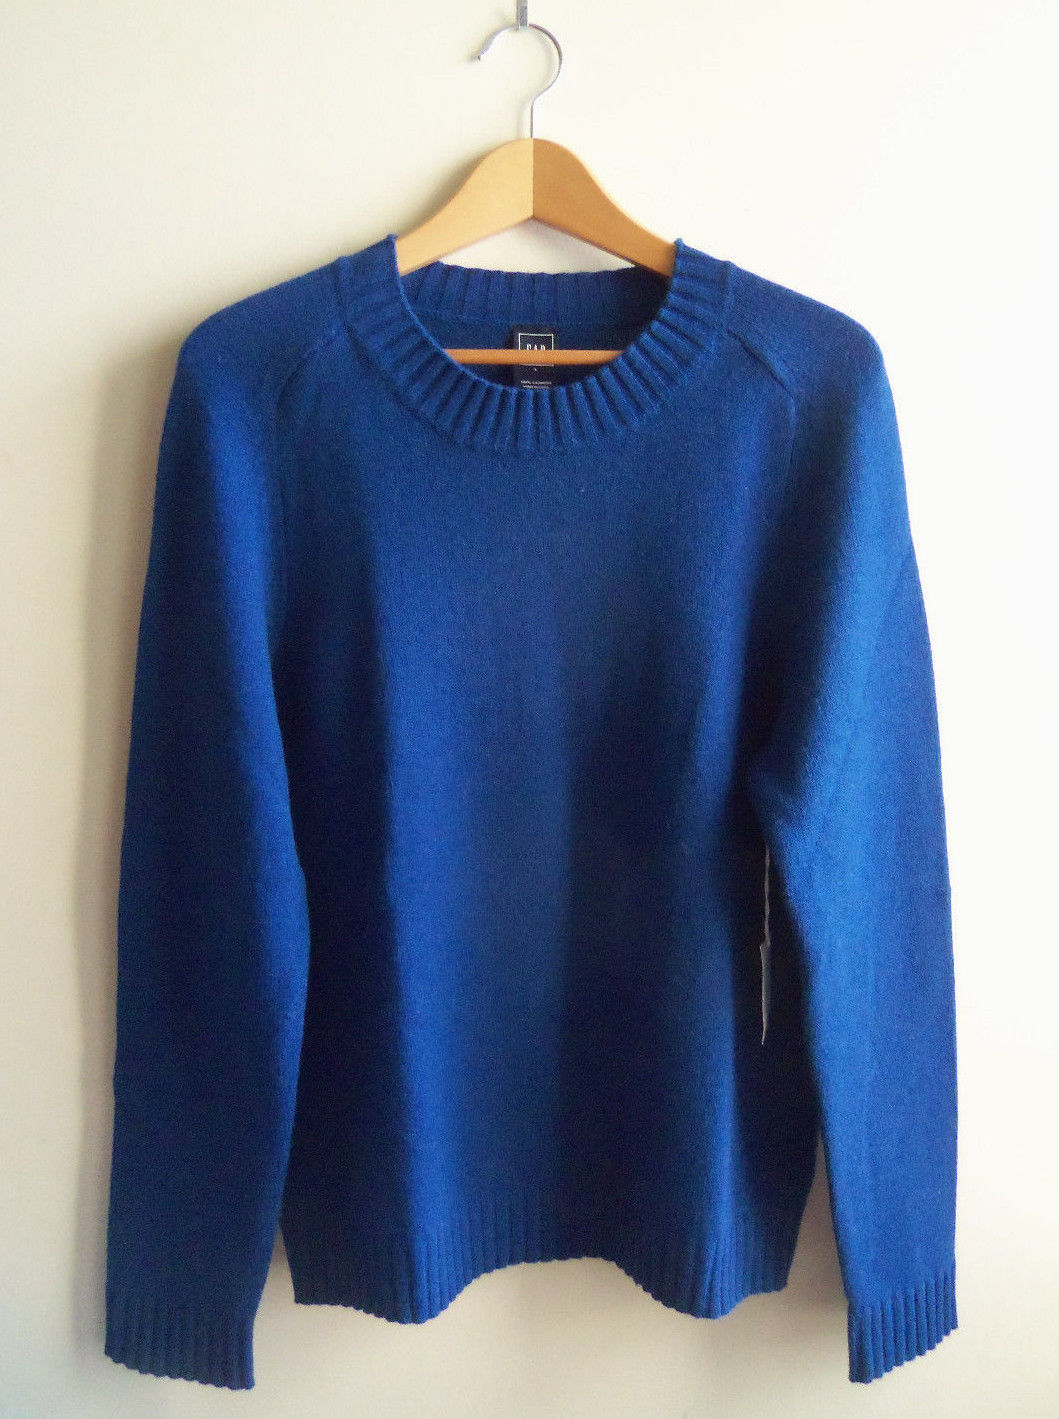 Primary image for GAP Women's 100% Cashmere Crewneck Sweater, Blue, Size L, NWT